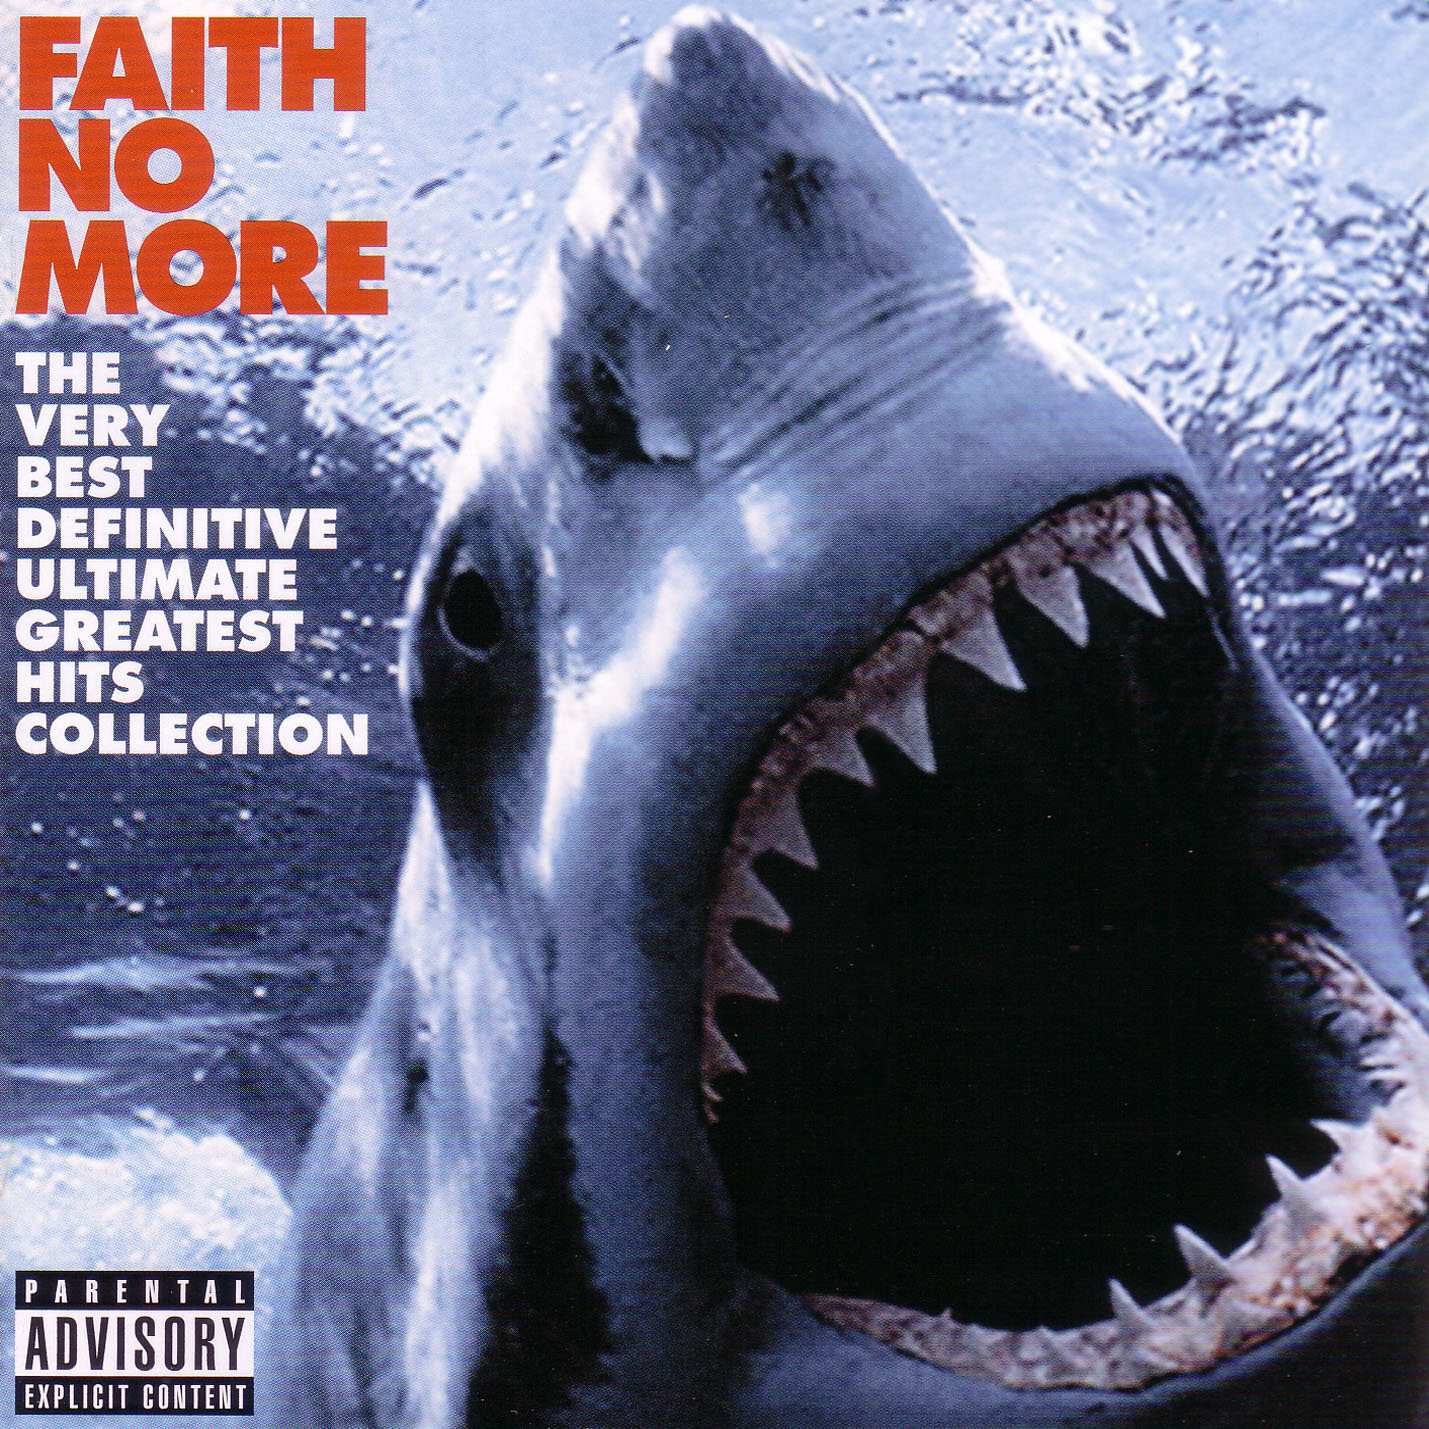 FAITH NO MORE - The Very Best Definitive Ultimate Greatest Hits Collection cover 